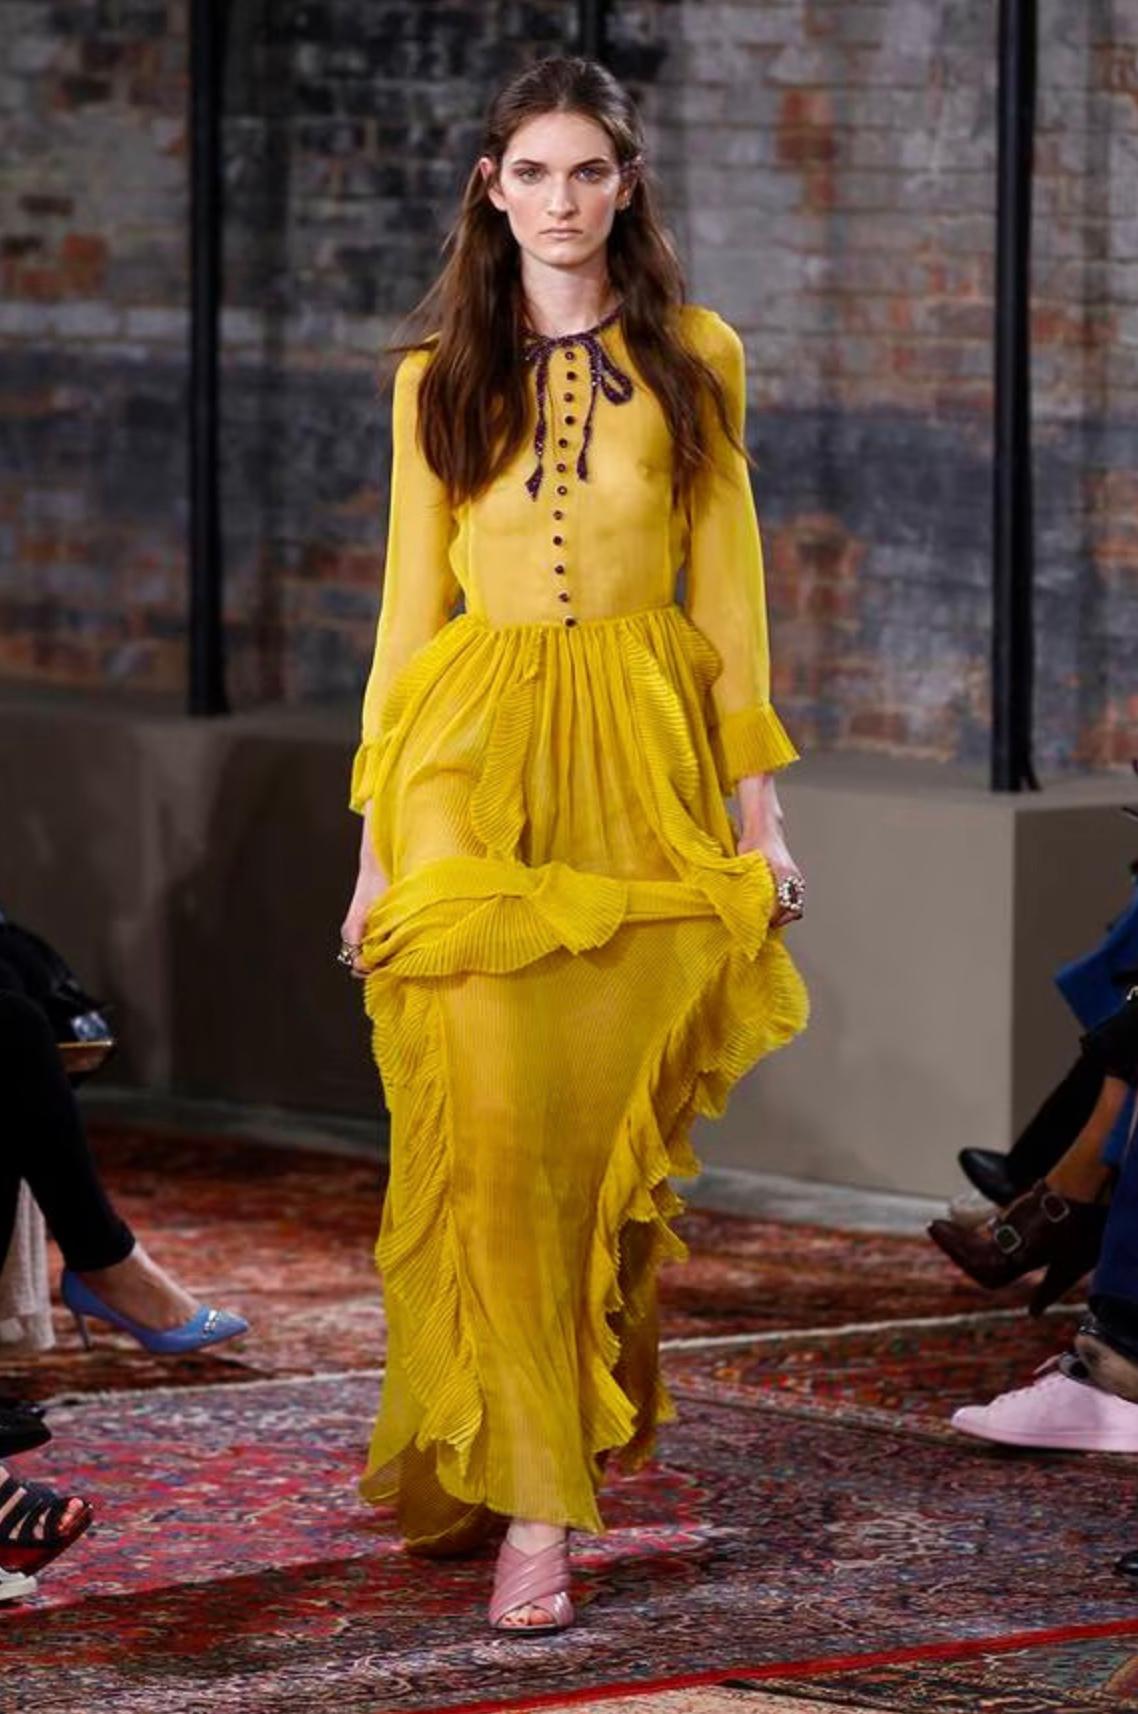 
Fabulous GUCCI 2016 Collection
Pure Silk Evening Gown with breathtaking crystal embellishment.
A Dream come true created by the genius Alessandro Michele <3
One of the most amazing Gucci Collections.
Vibrant chartreuse color, the most beautiful